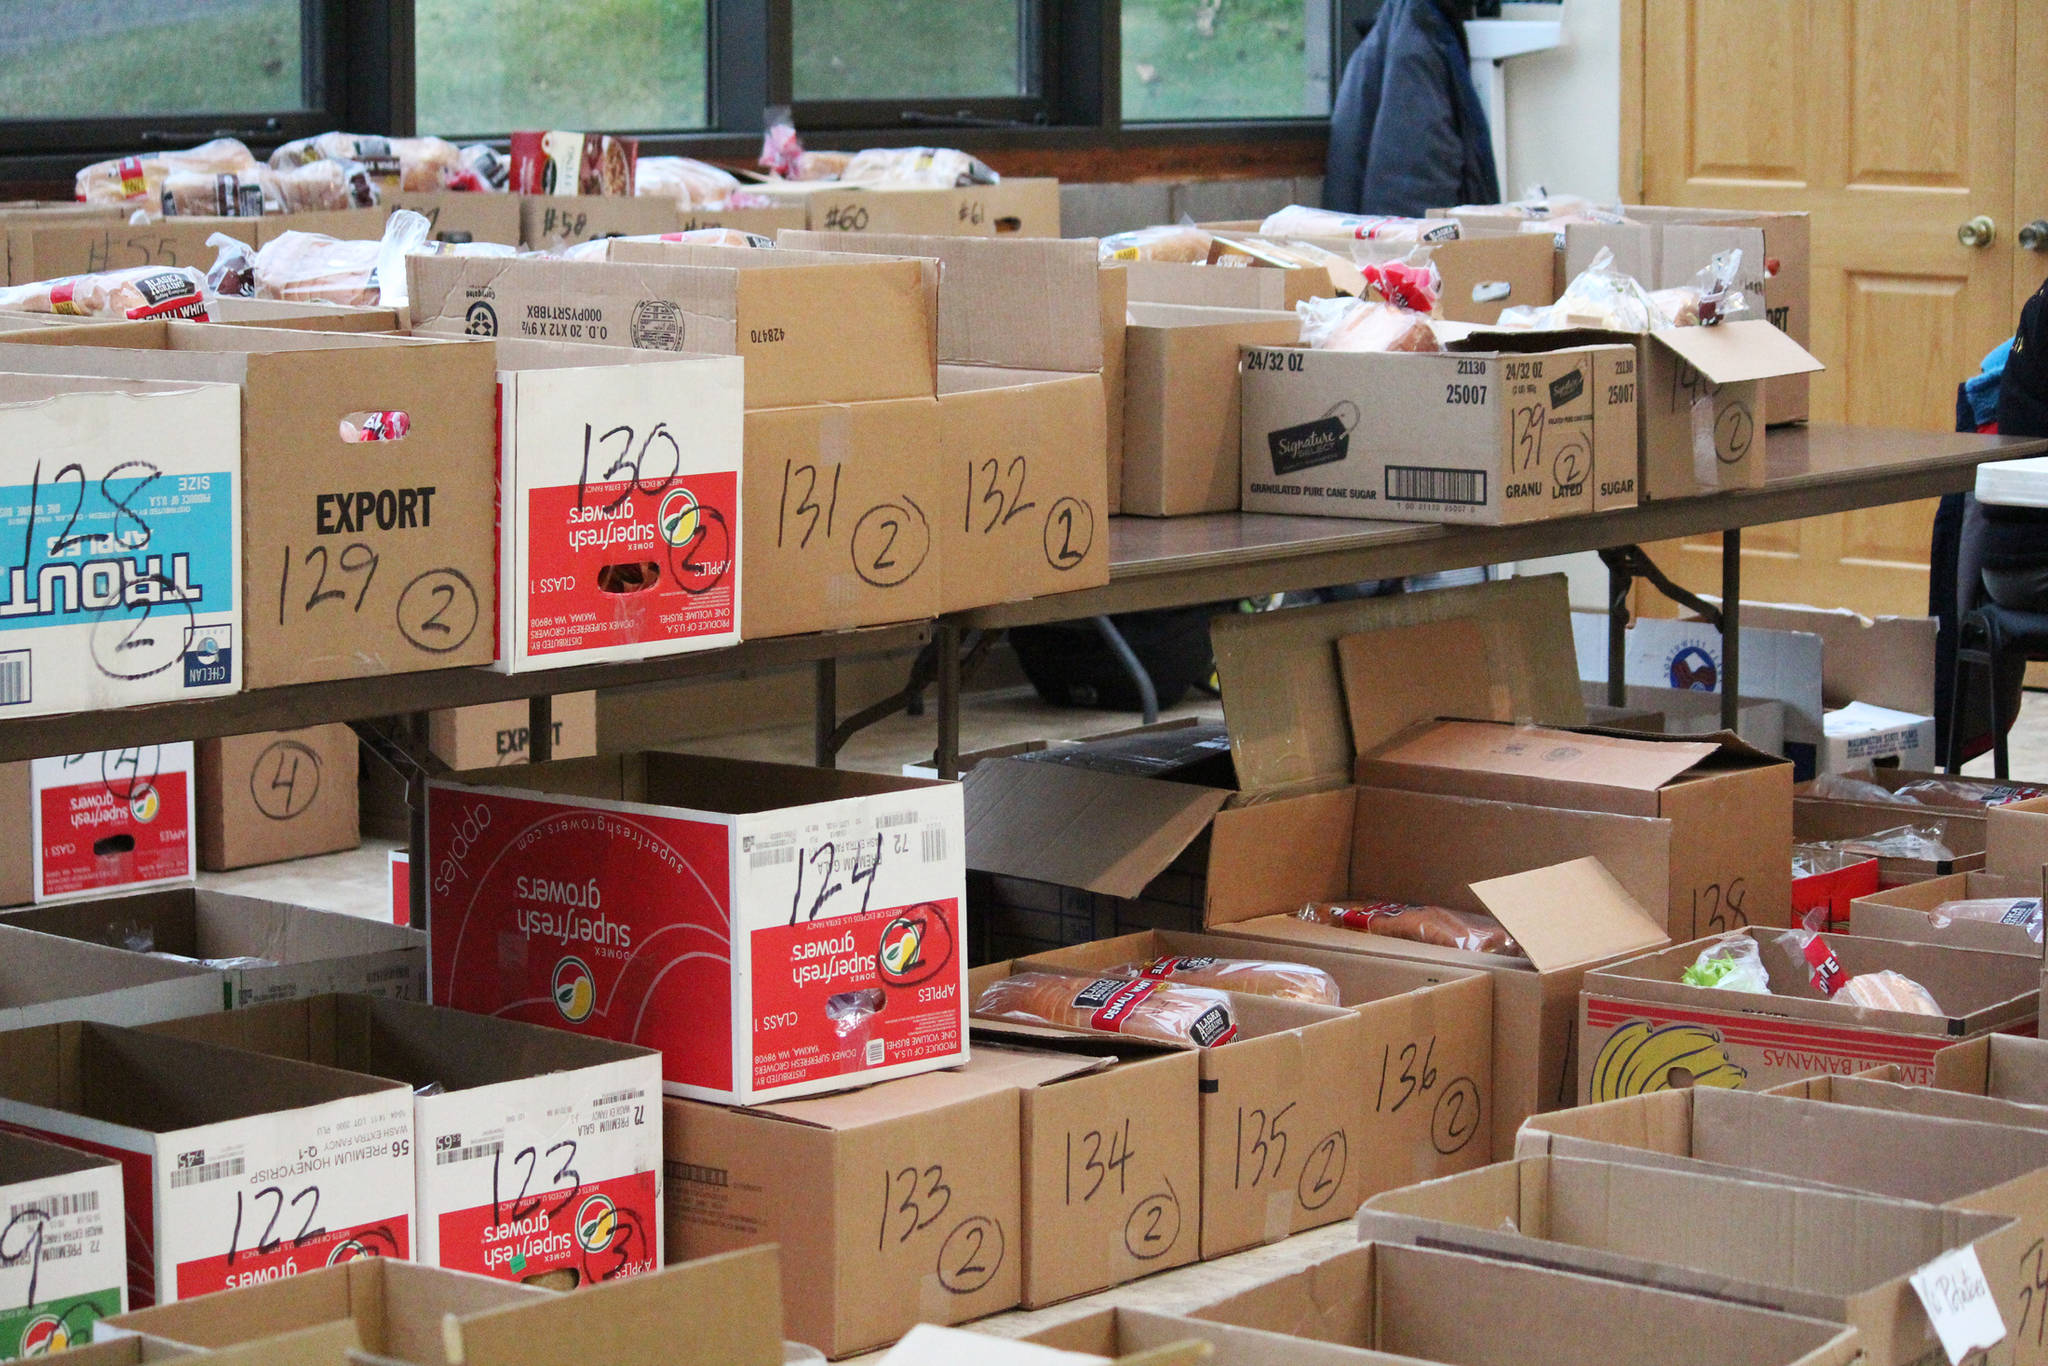 Boxes of food and ingredients are organized by the Kachemak Bay Lion’s Club for their annual Thanksgiving baskets Sautrday, Nov. 17, 2018 at the Homer United Methodist Church in Homer, Alaska. (Photo by Megan Pacer/Homer News)